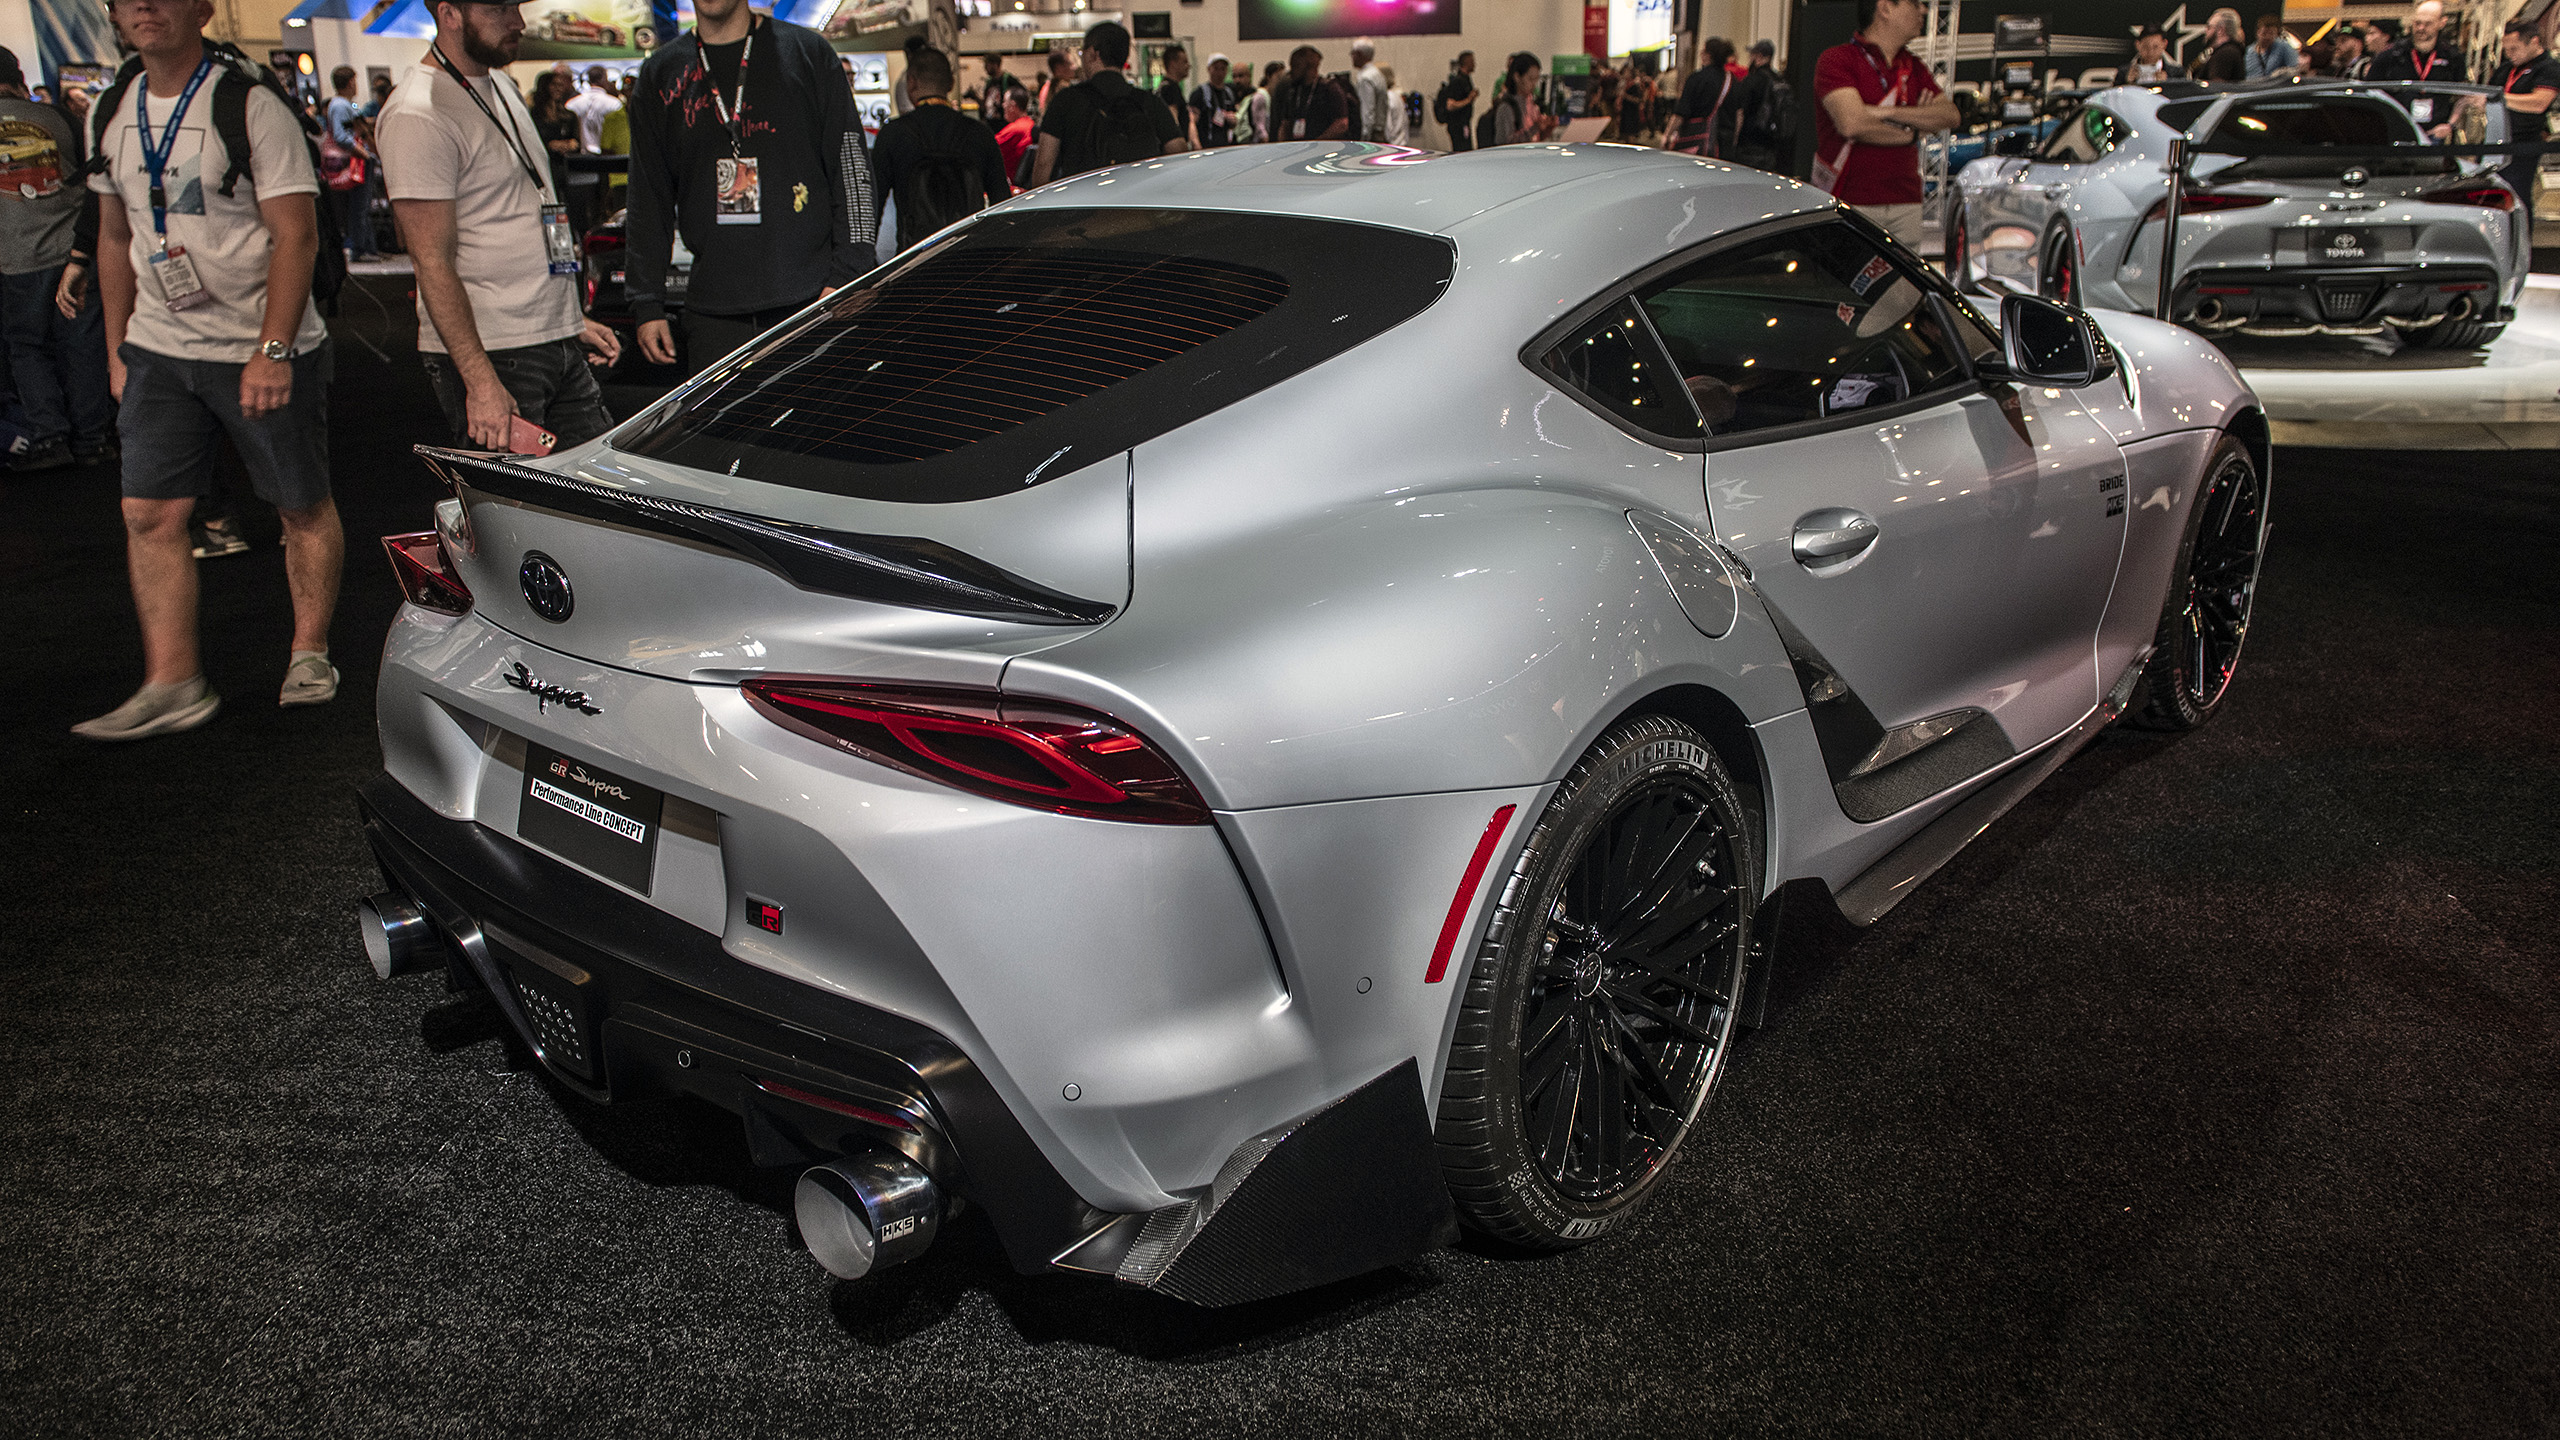 SEMA auto show: Here are 45 of its most interesting cars and trucks ...